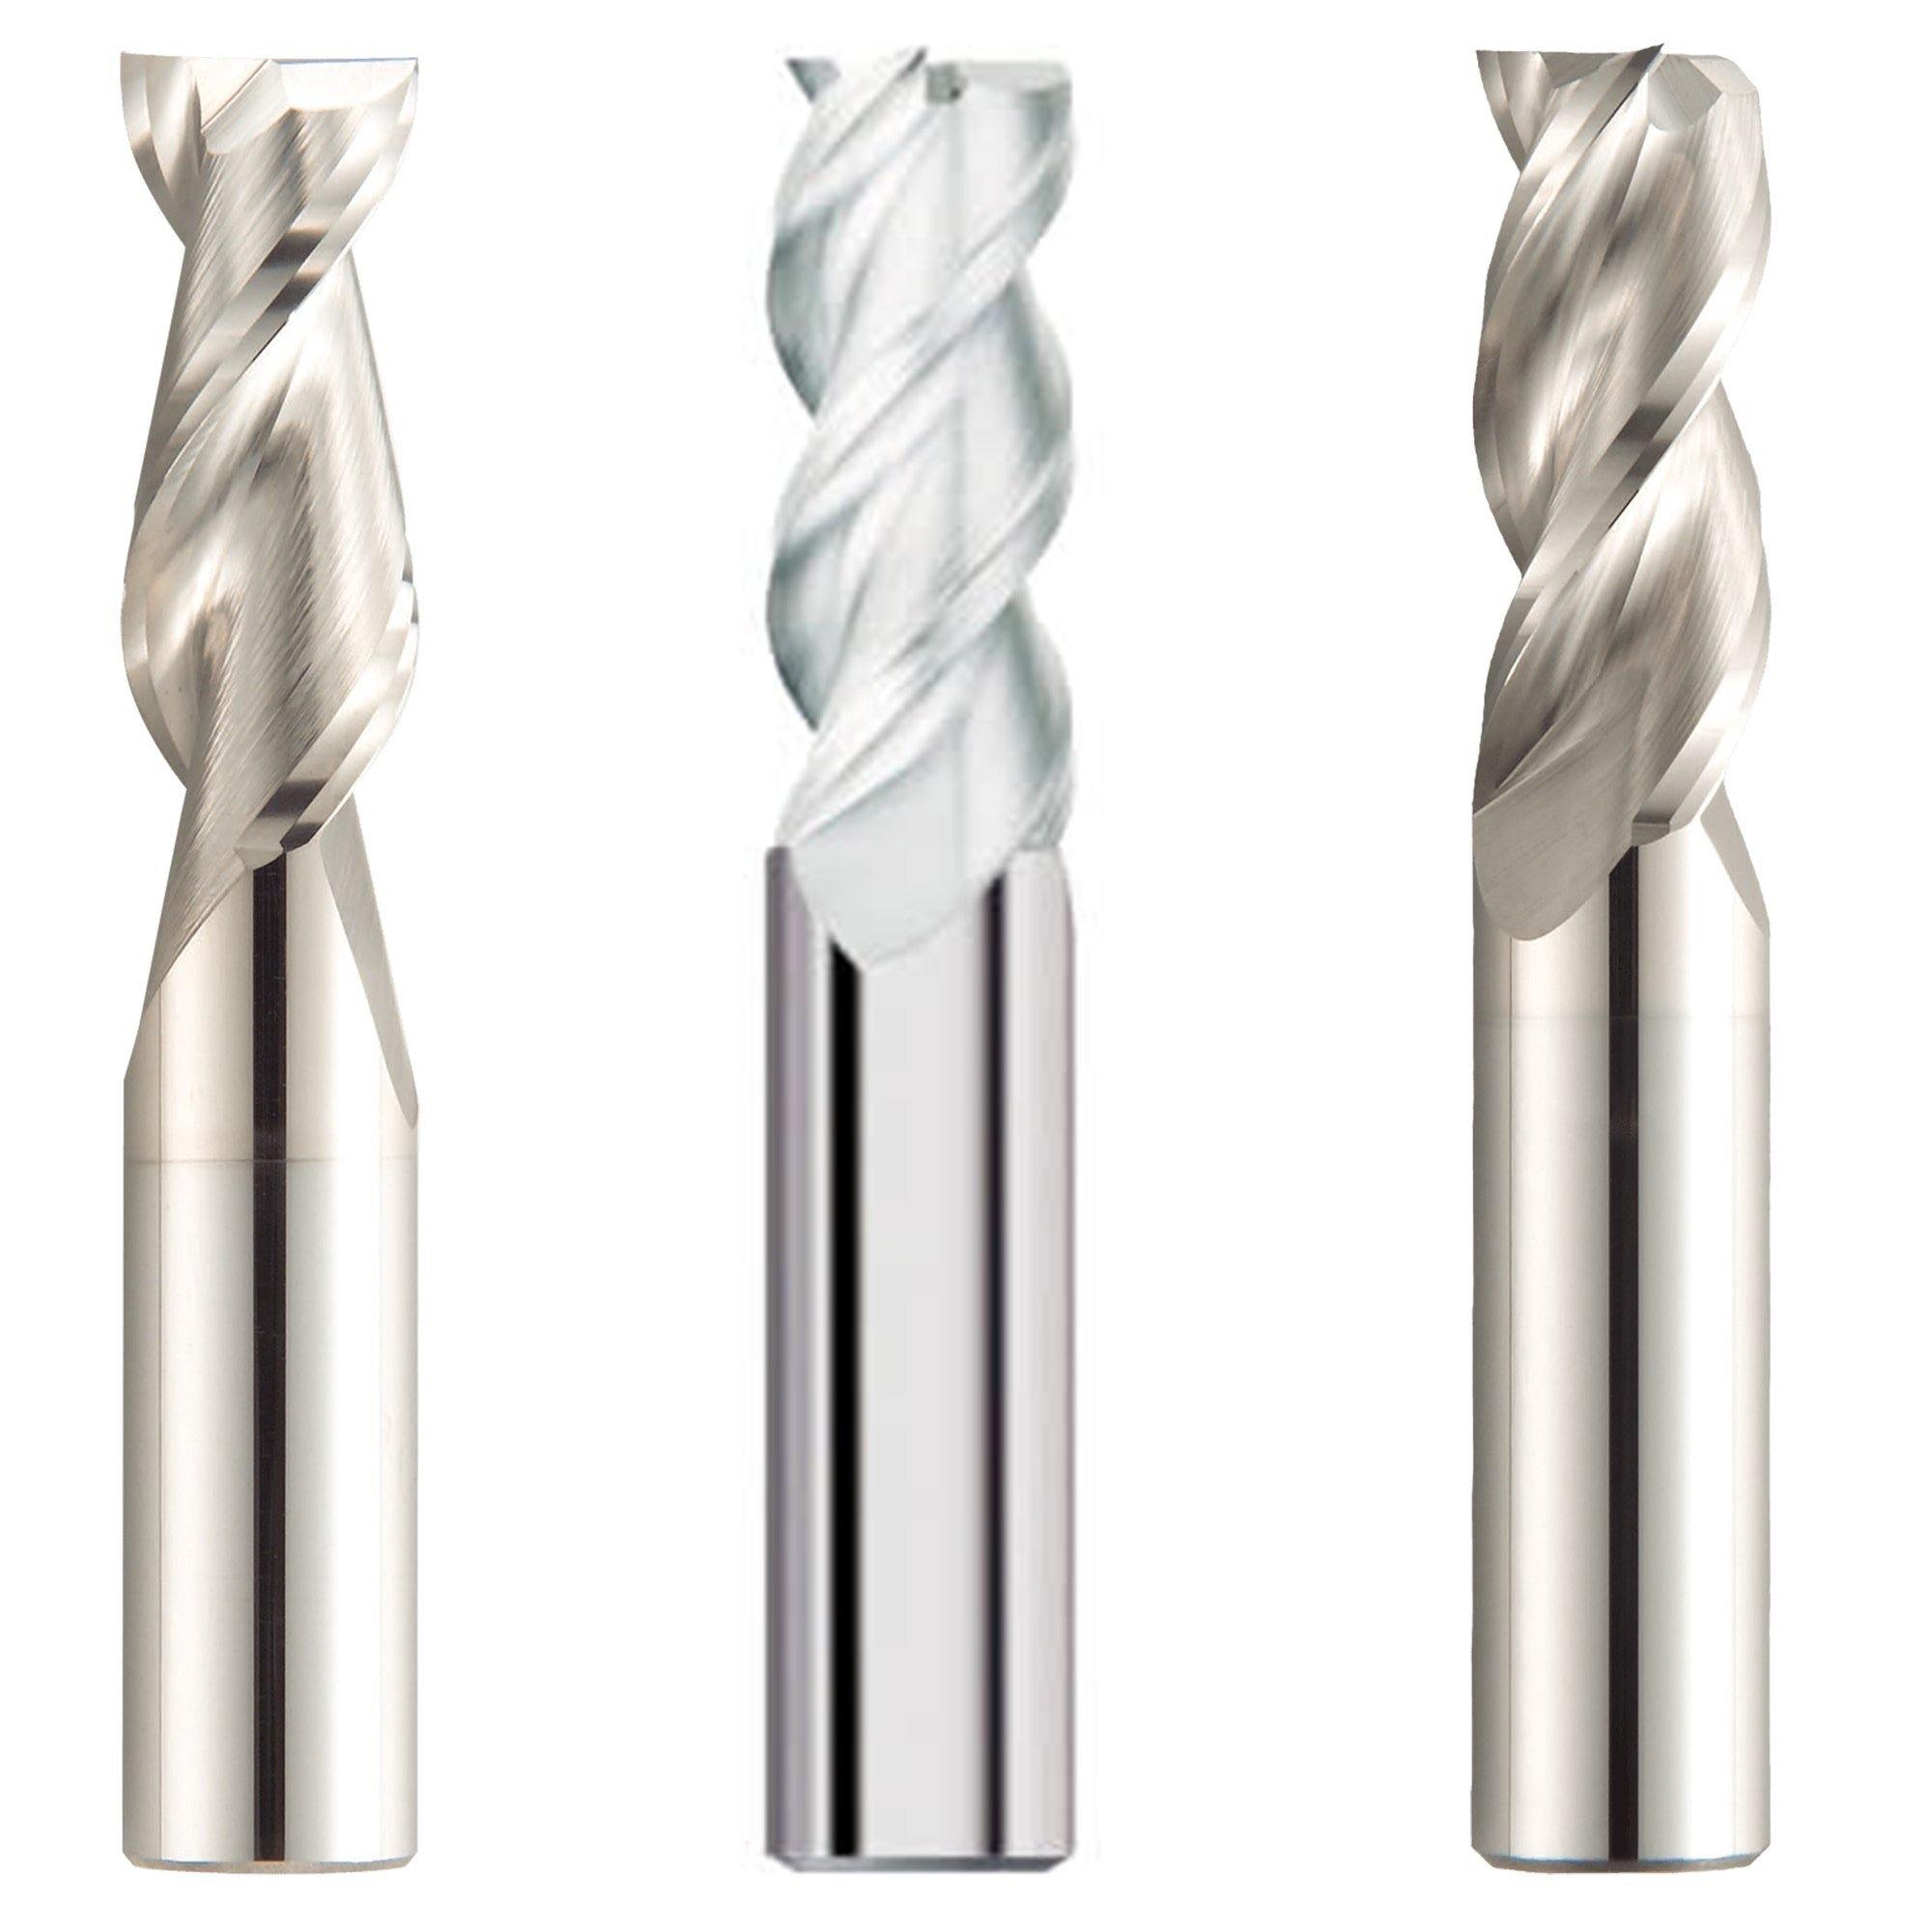 (3 Pack) 5/8" x 2-1/4" x 5" Aluminum HP Carbide End Mills - The End Mill Store 